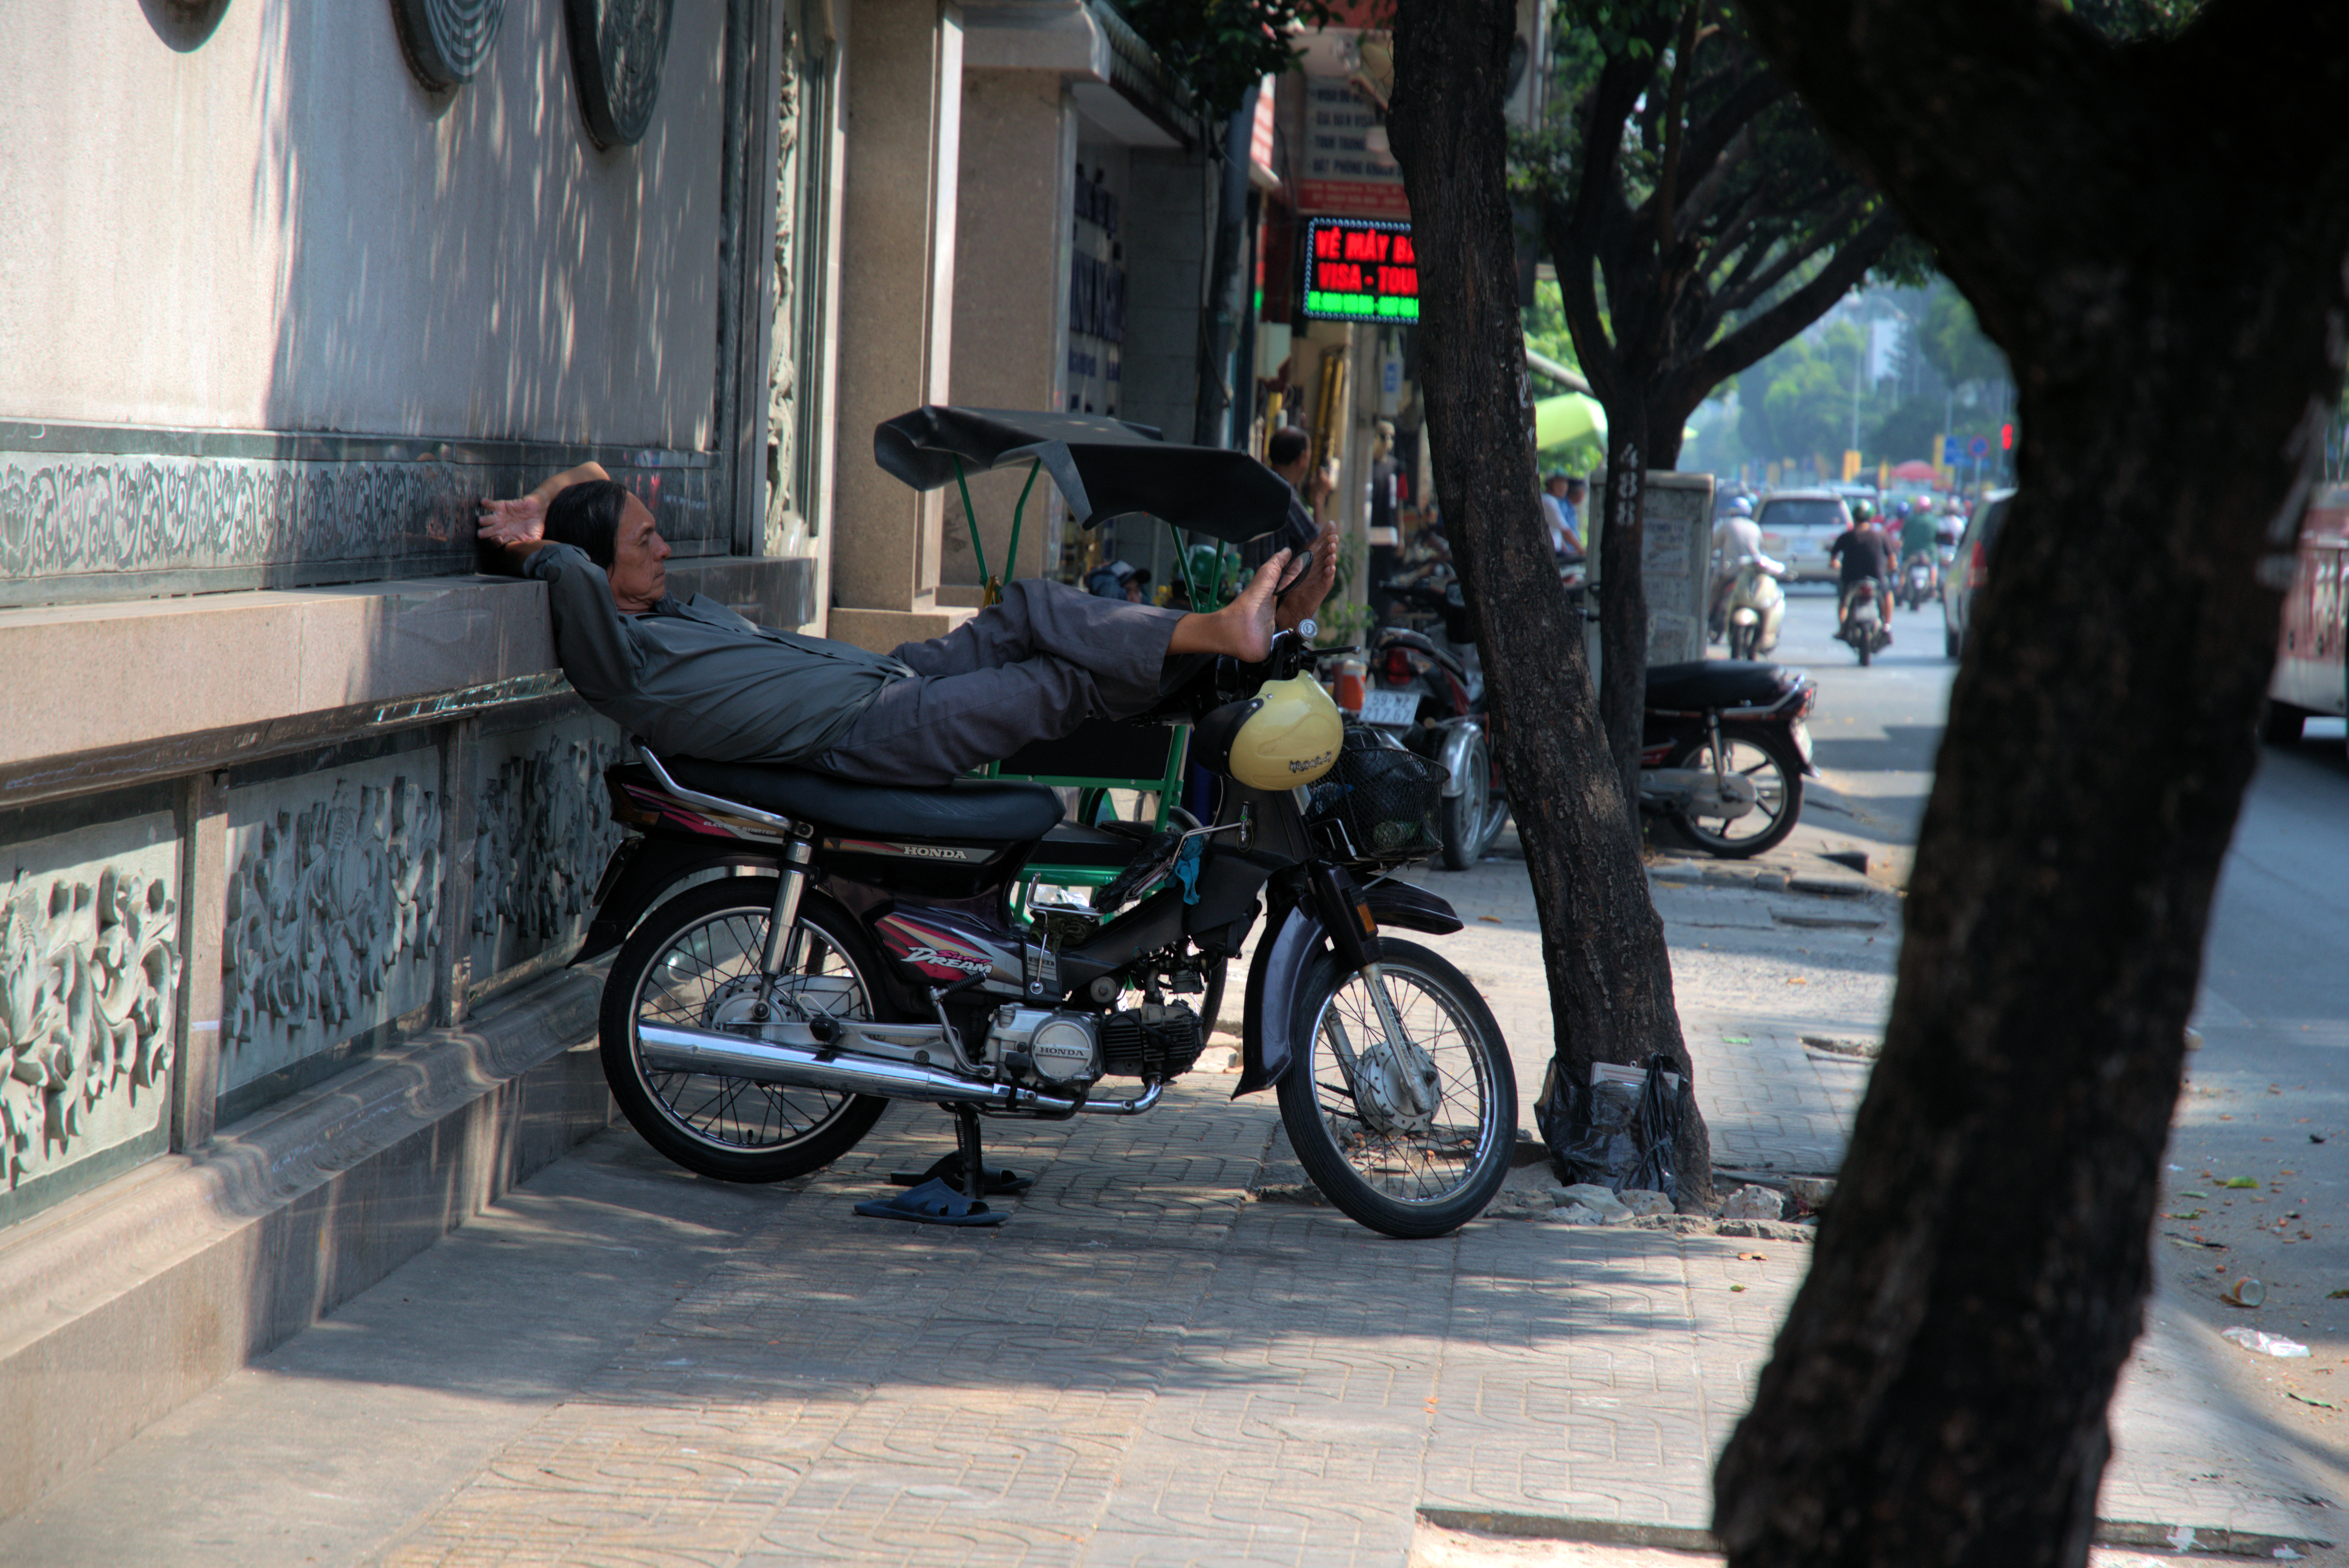 A  xe om (motorbike taxi) driver is seen taking a nap on the sidewalk in the photo captured by Kyle Nunas.